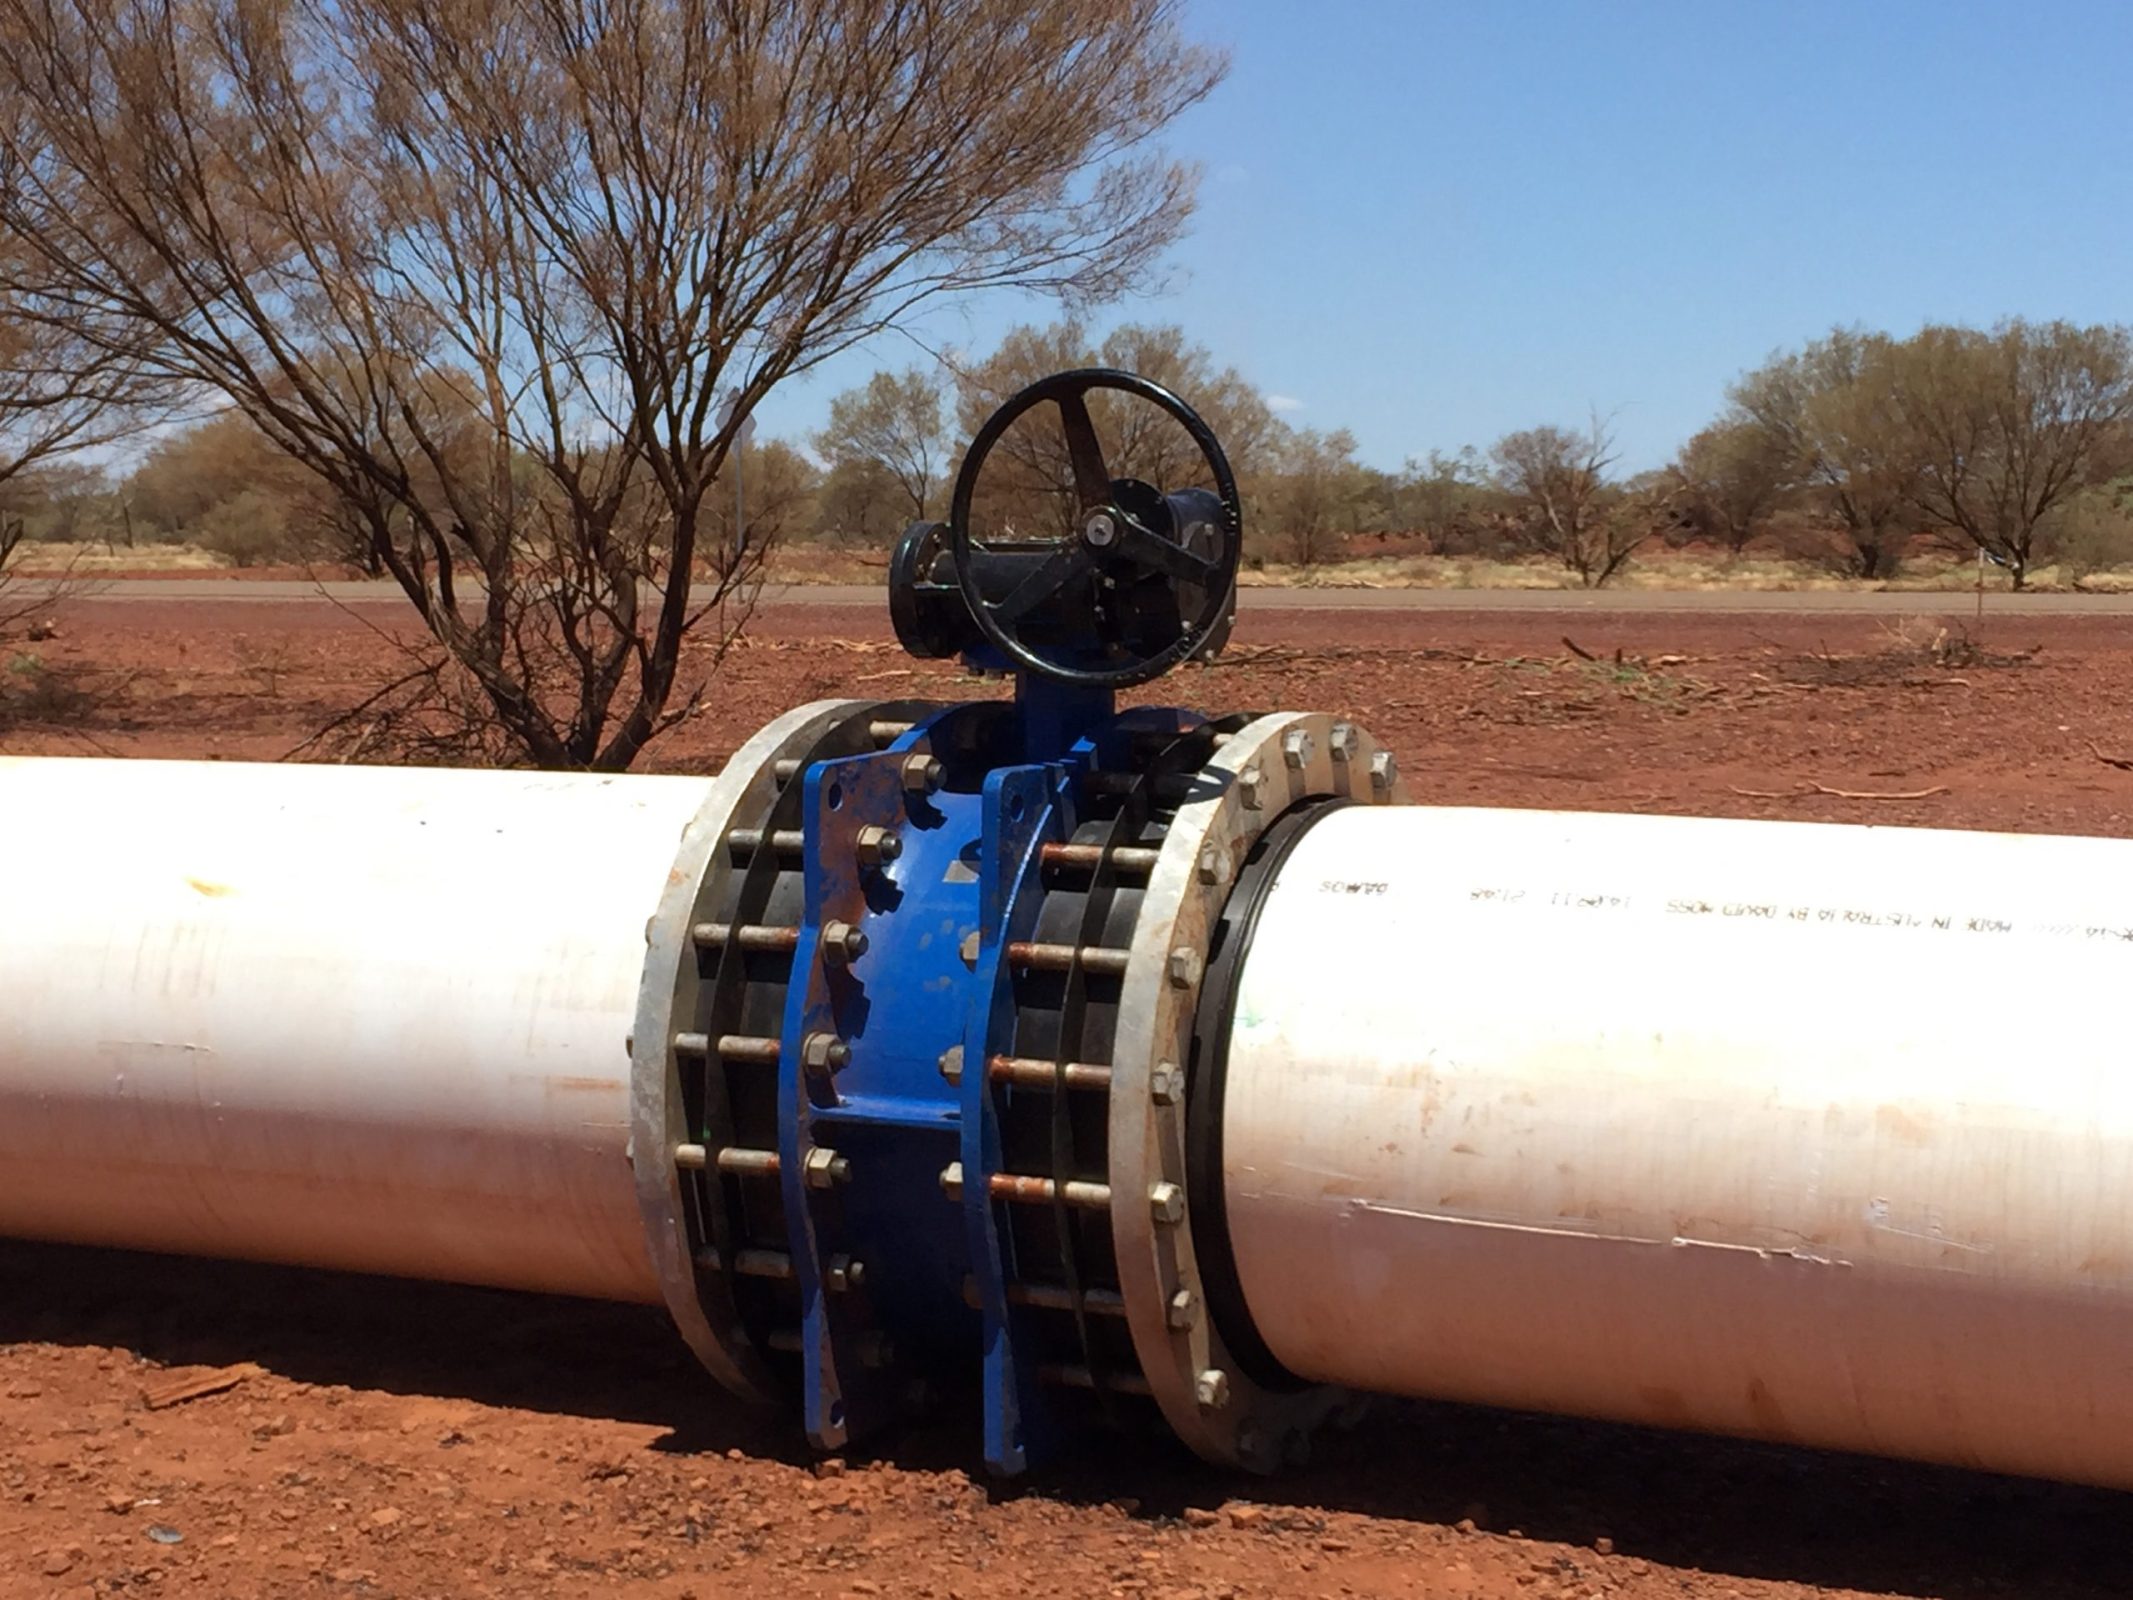 A large infrastructure pipeline with a blue and white valve attached.